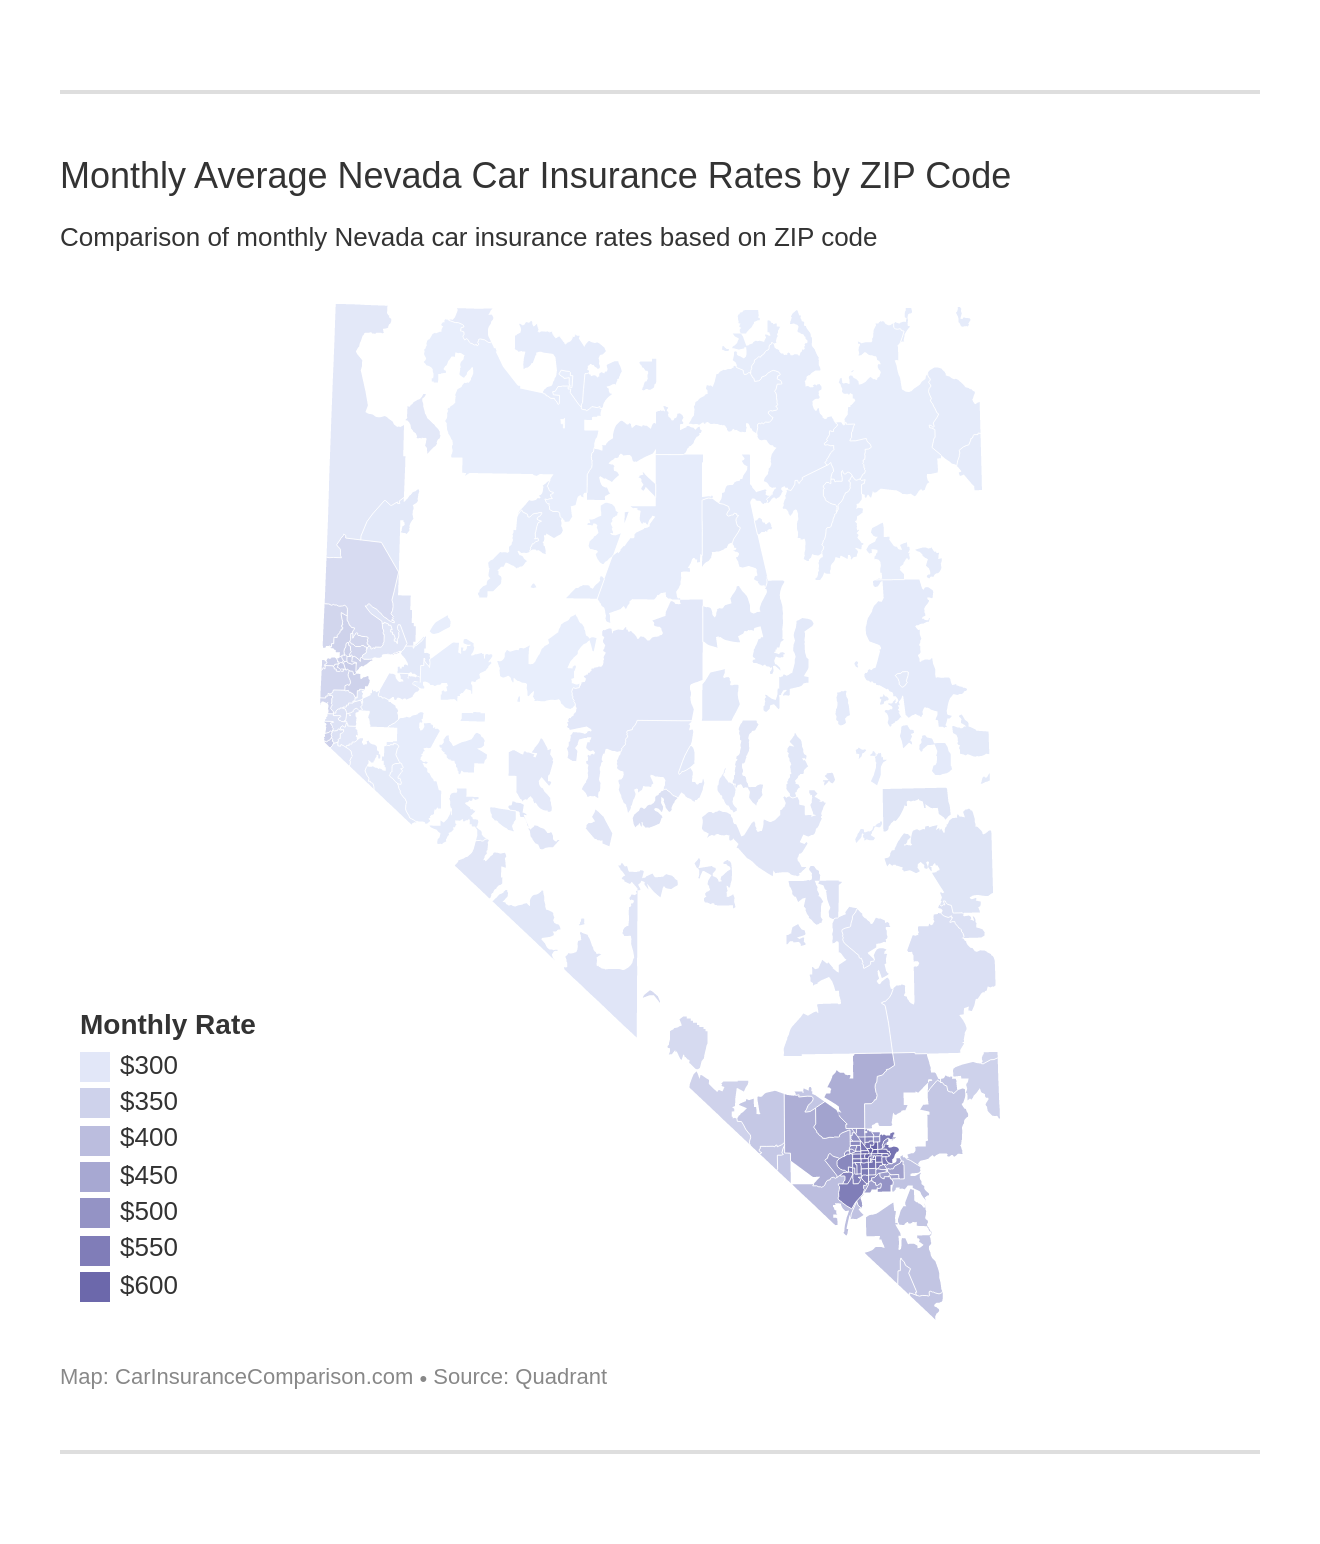 Monthly Average Nevada Car Insurance Rates by ZIP Code